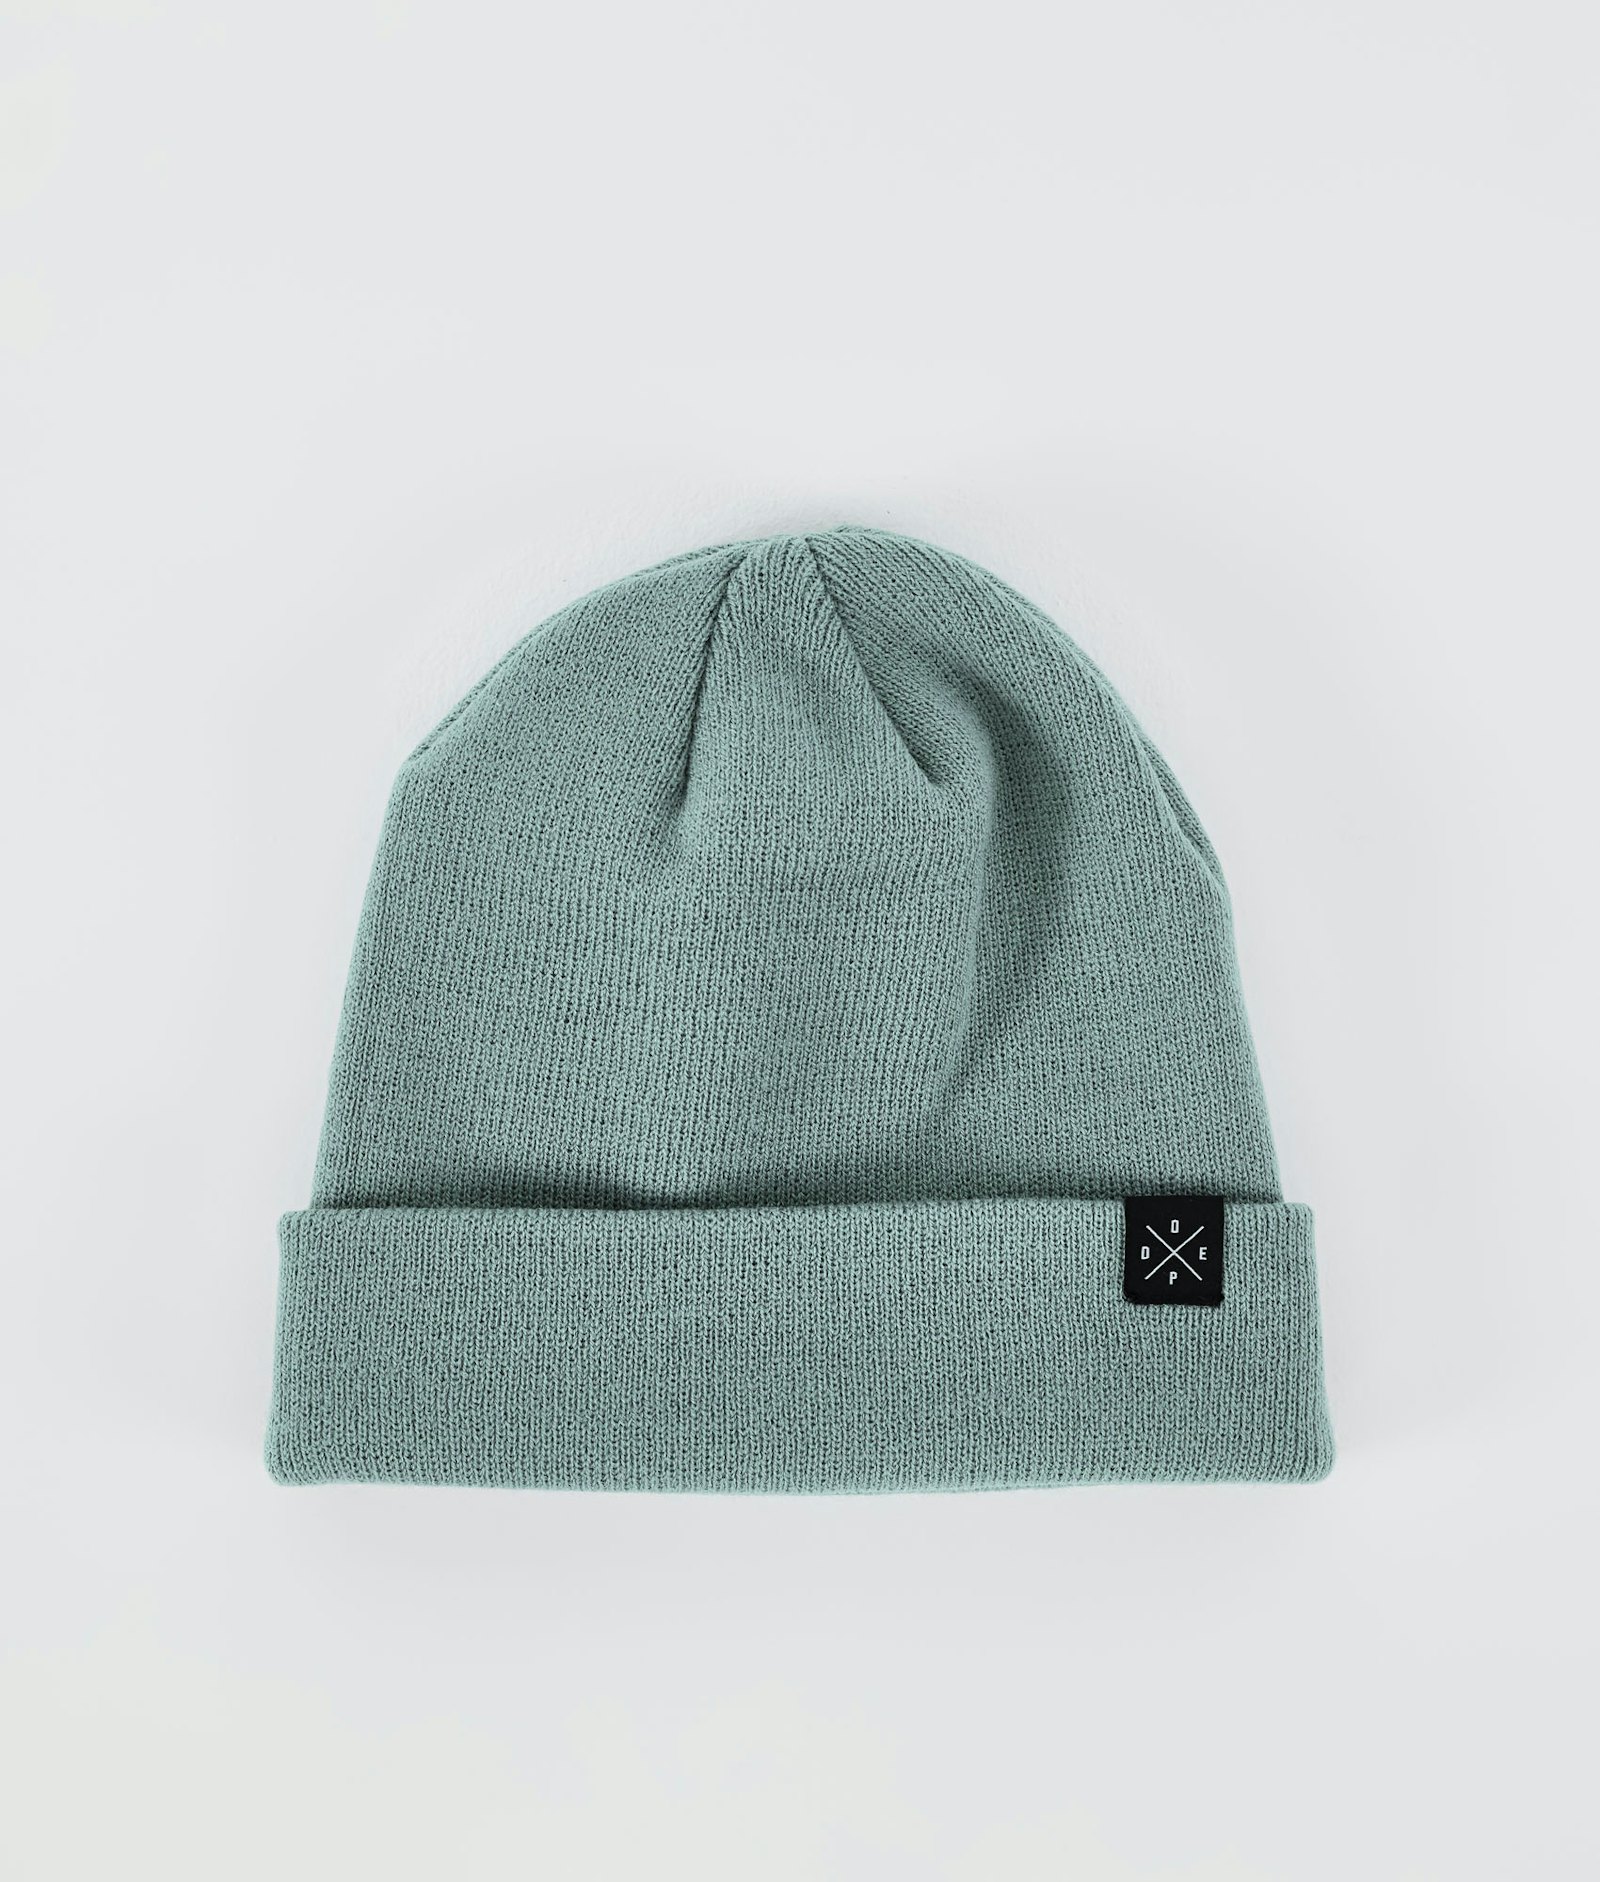 Dope Solitude 2021 Beanie Faded Green, Image 2 of 4